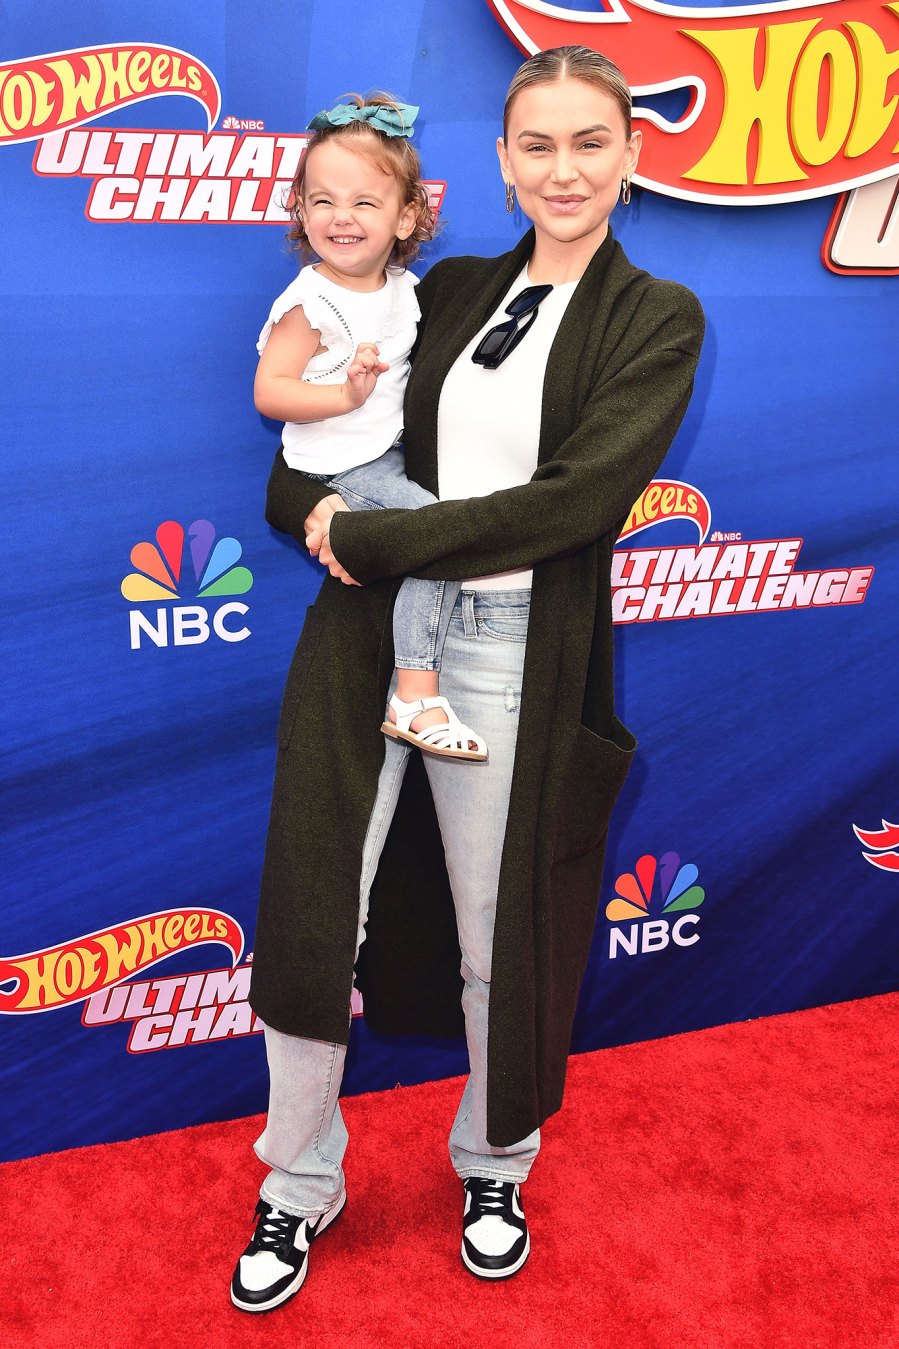 ‘Vanderpump Rules’ Stars Walk The Hot Wheels Ultimate Challenge Red Carpet With Their Kids: Photos